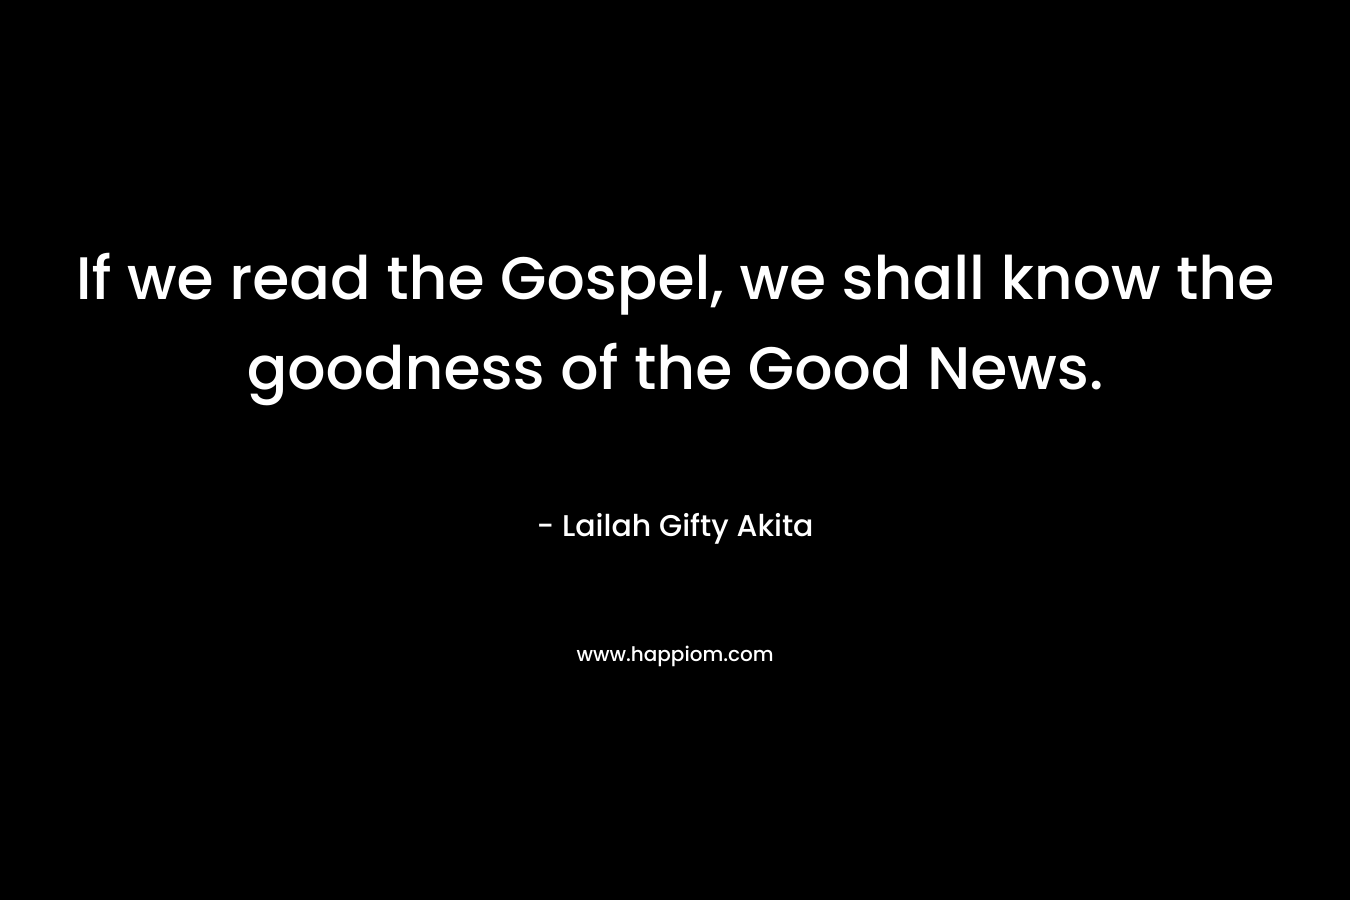 If we read the Gospel, we shall know the goodness of the Good News.